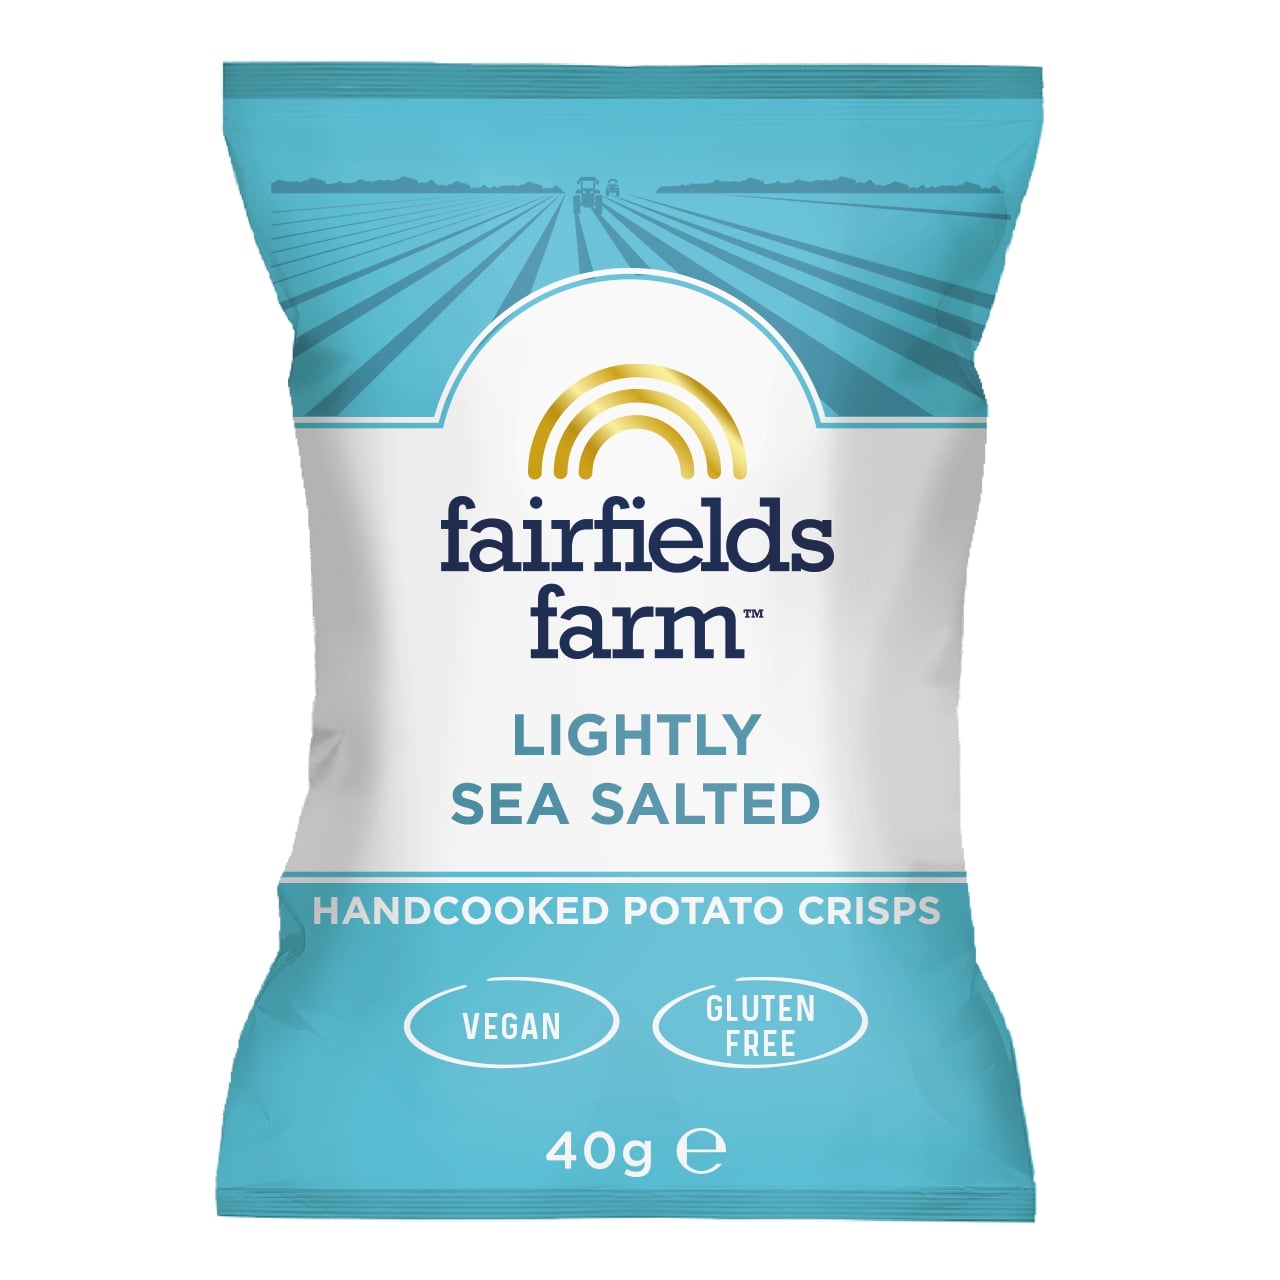 Lightly Sea Salted – 36 x 40g bags